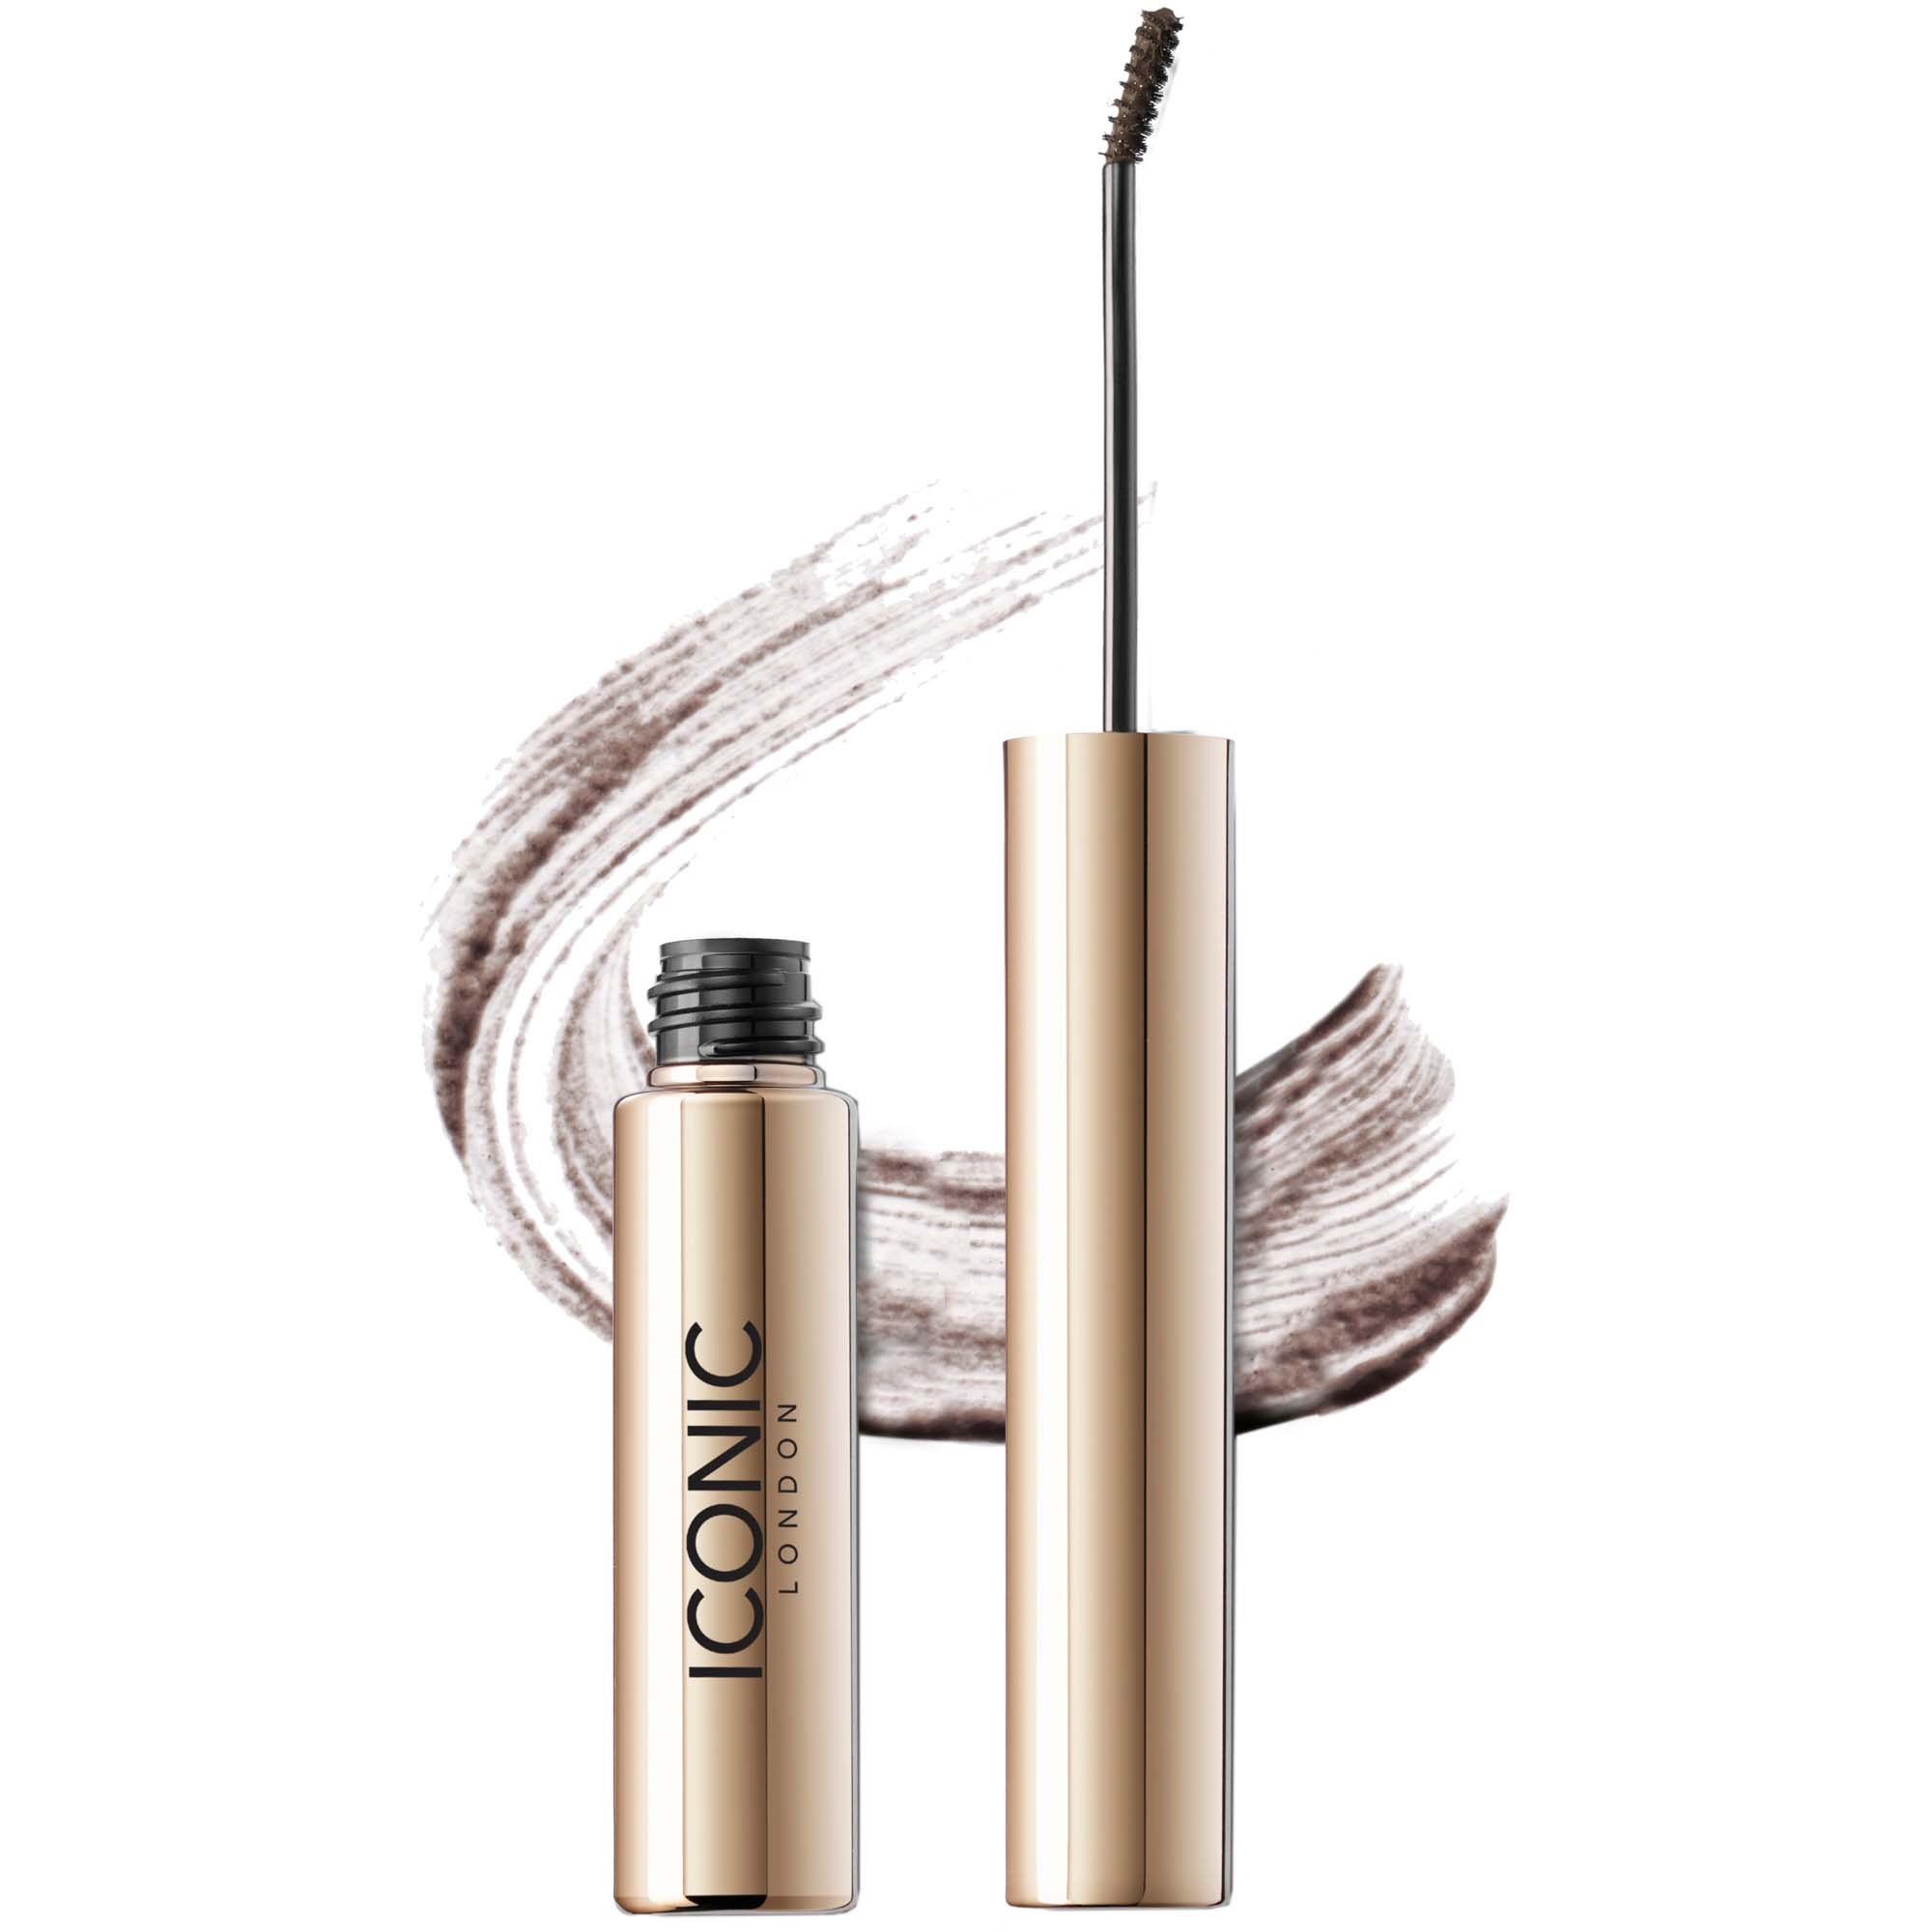 Läs mer om ICONIC London Brow Gel Tint and Texture Chestnut Brown